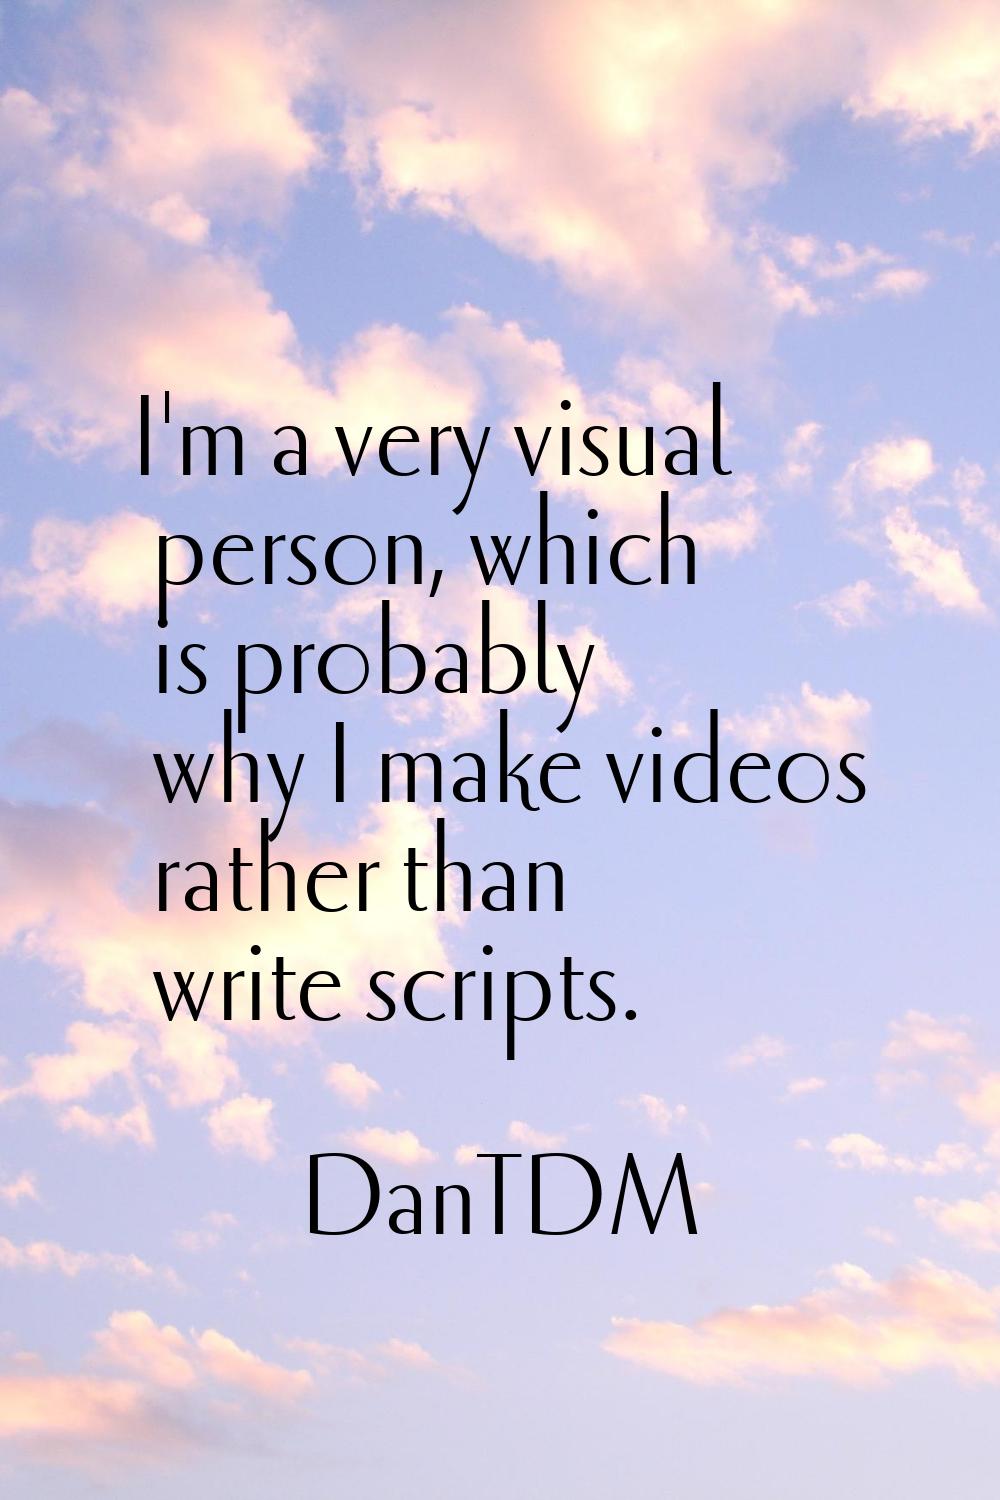 I'm a very visual person, which is probably why I make videos rather than write scripts.